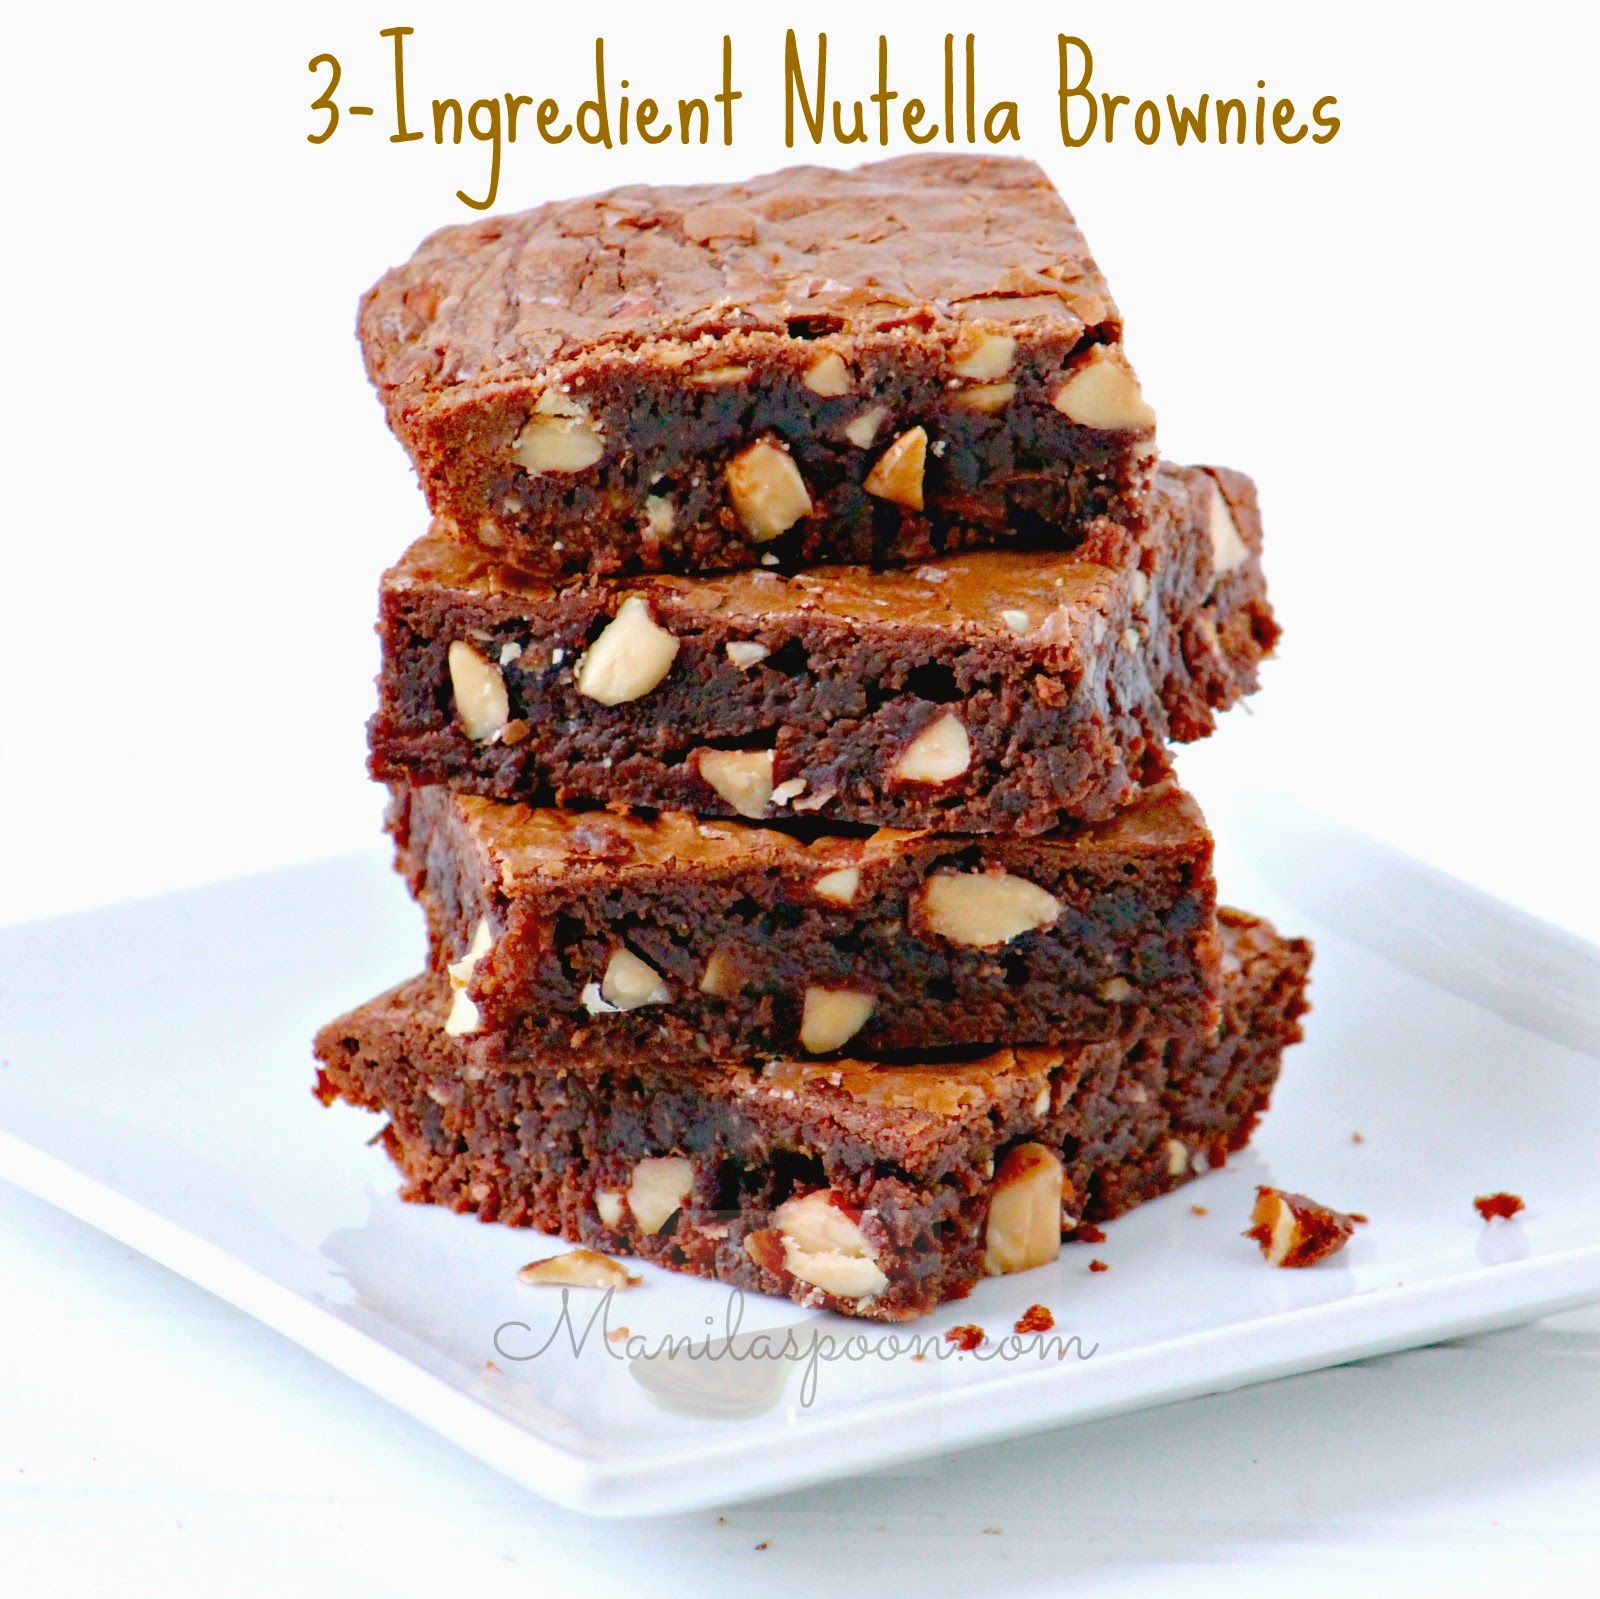 Fudgy, nutty, yummy - everything I love in a brownie - 3-INGREDIENT NUTELLA BROWNIES! GLUTEN-FREE and all-purpose flour options for you to choose from. #nutella #brownies #3ingredients #glutenfree